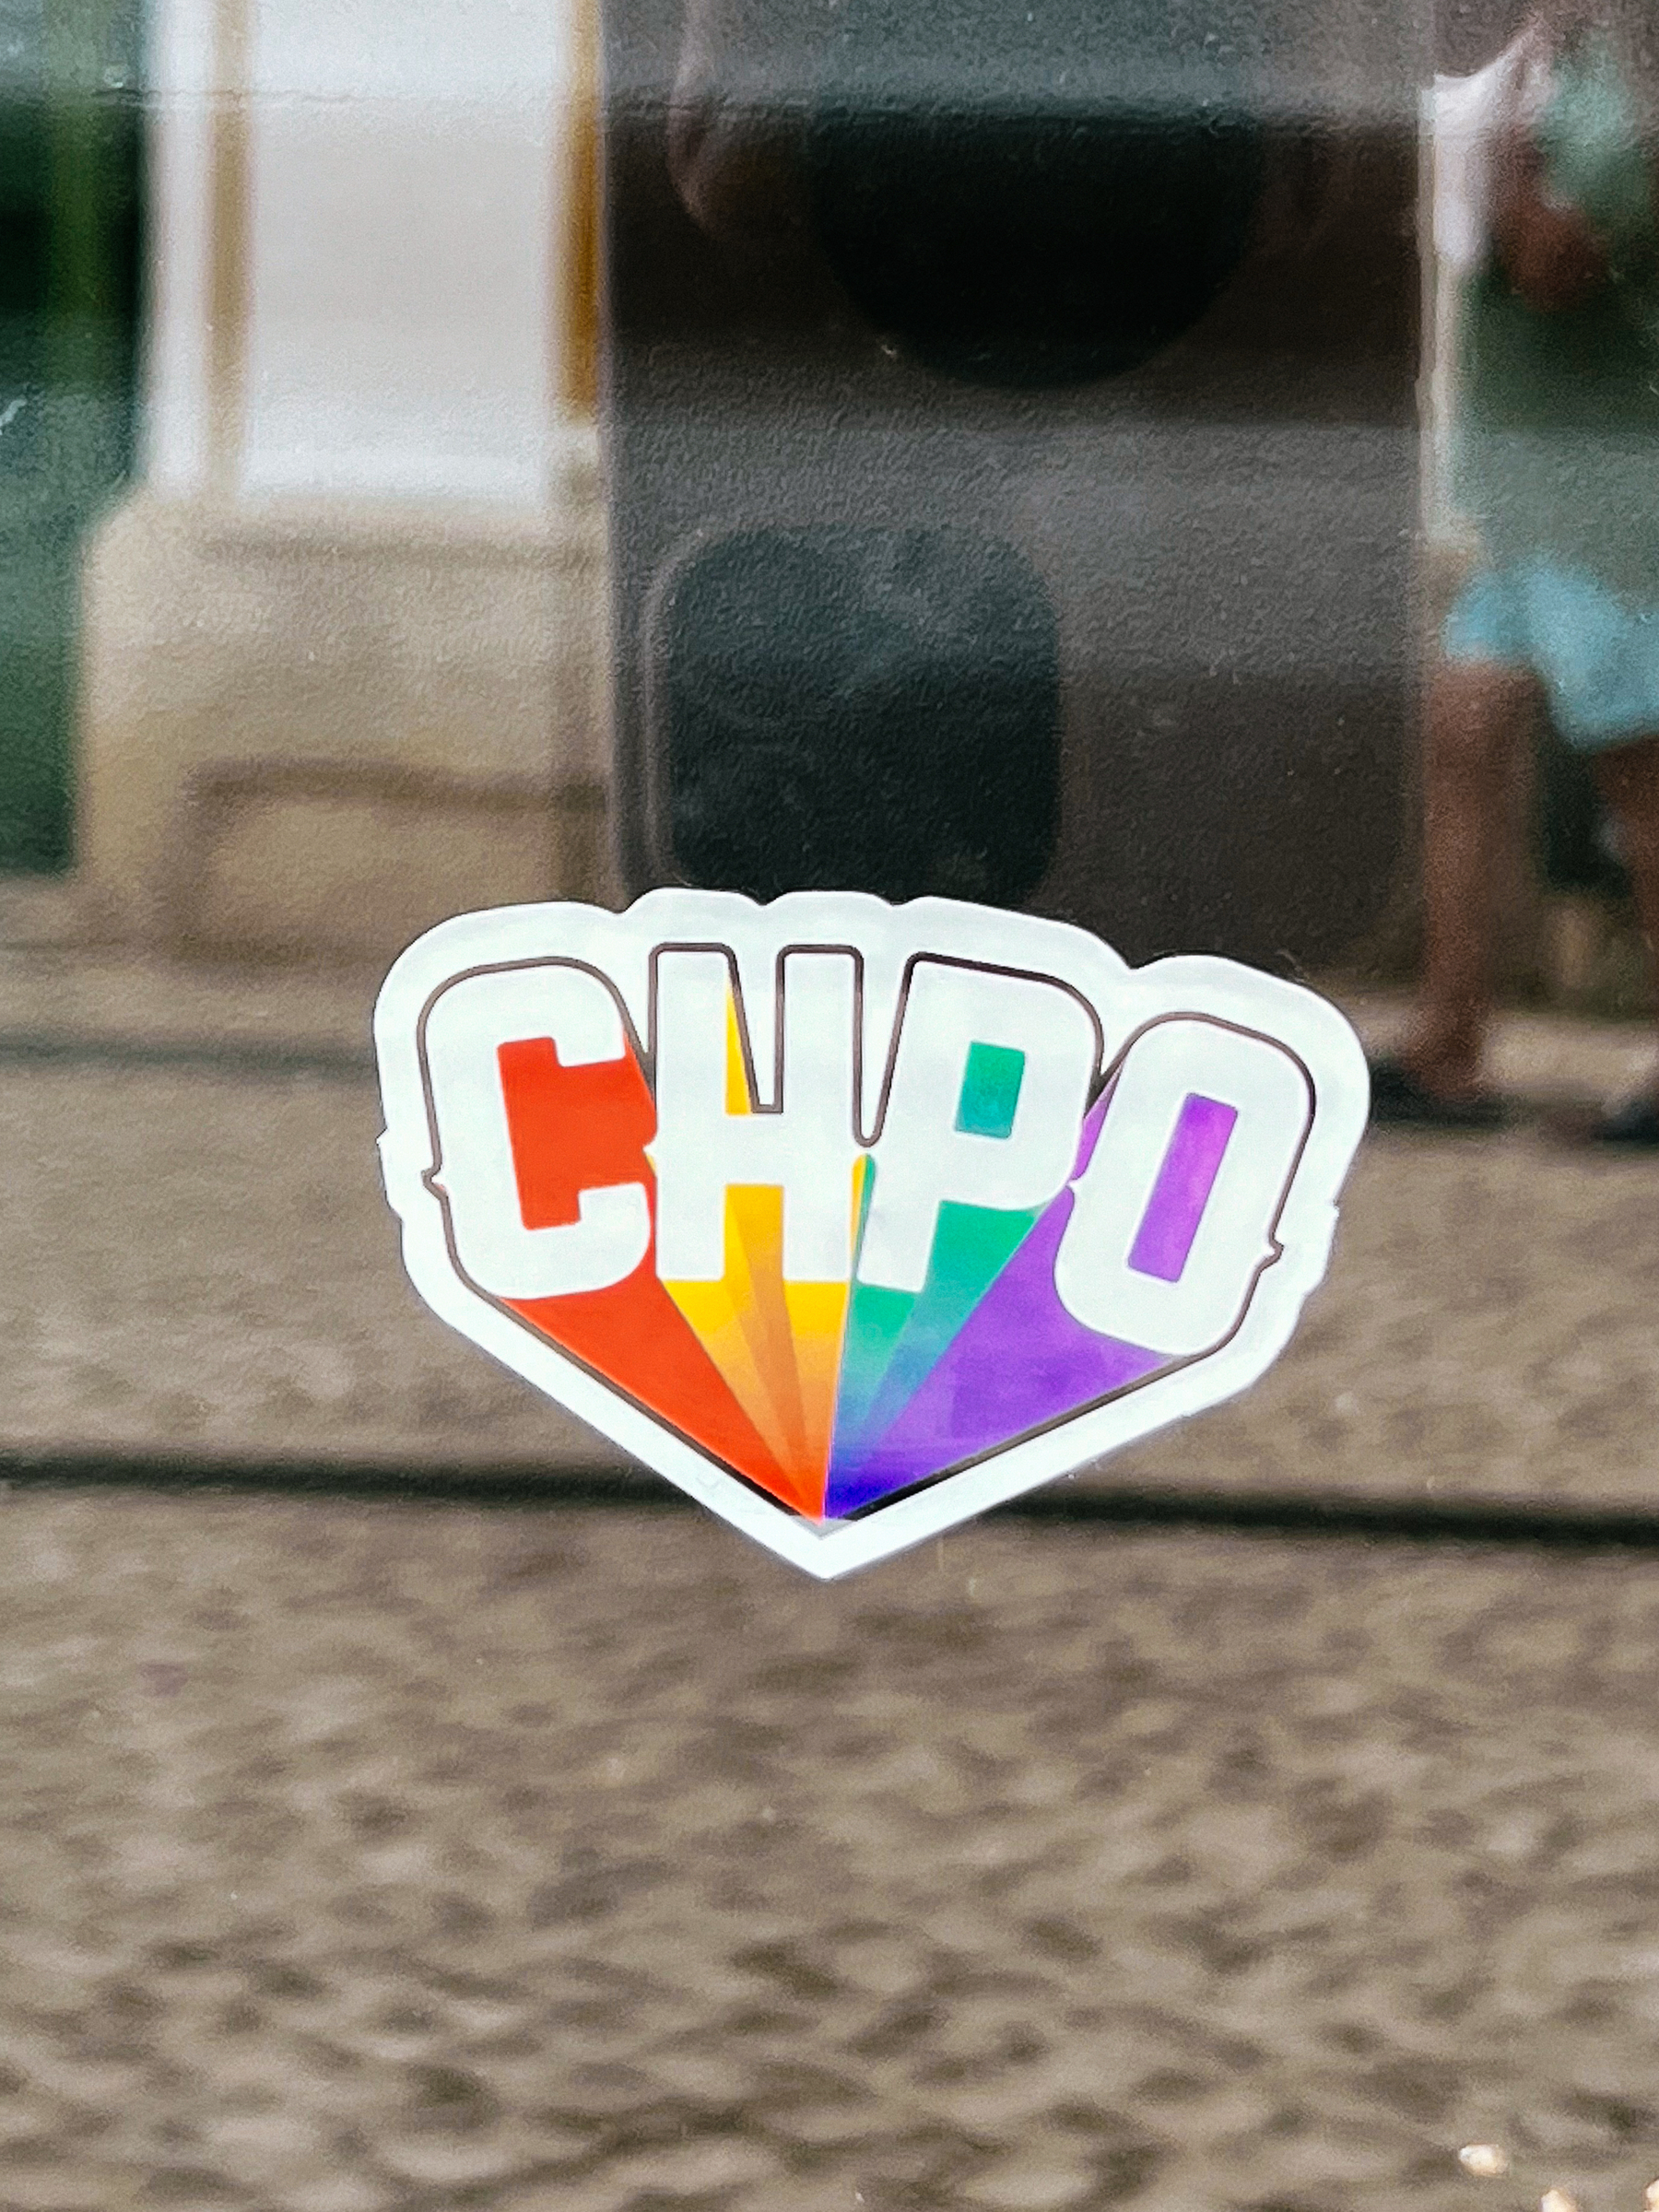 “CHPO”, with rainbow colors going off into the distance. A sticker. On a window. 